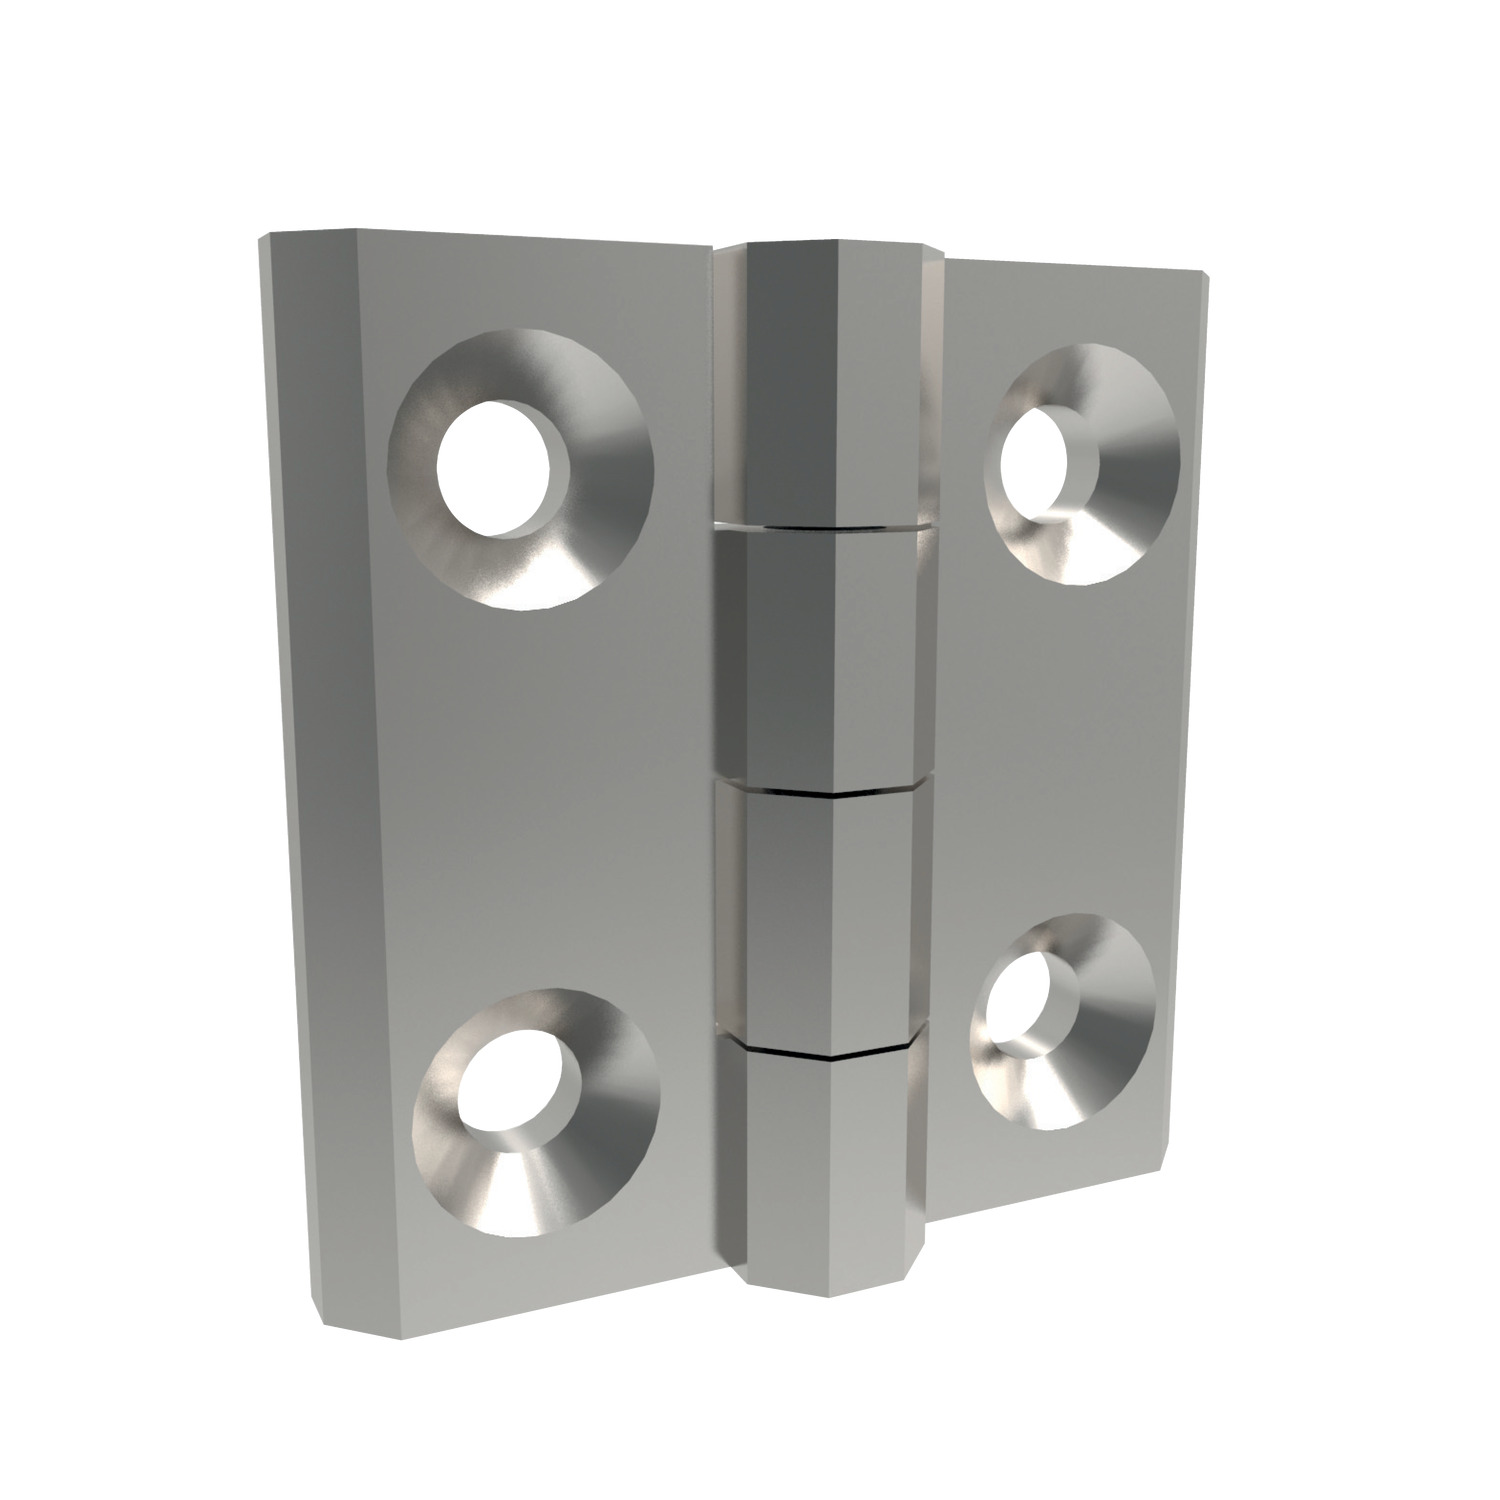 Surface Mount - Leaf Hinges External hinges - Screw mount. For plain/flush mounted doors as well as electrical panels and covers.